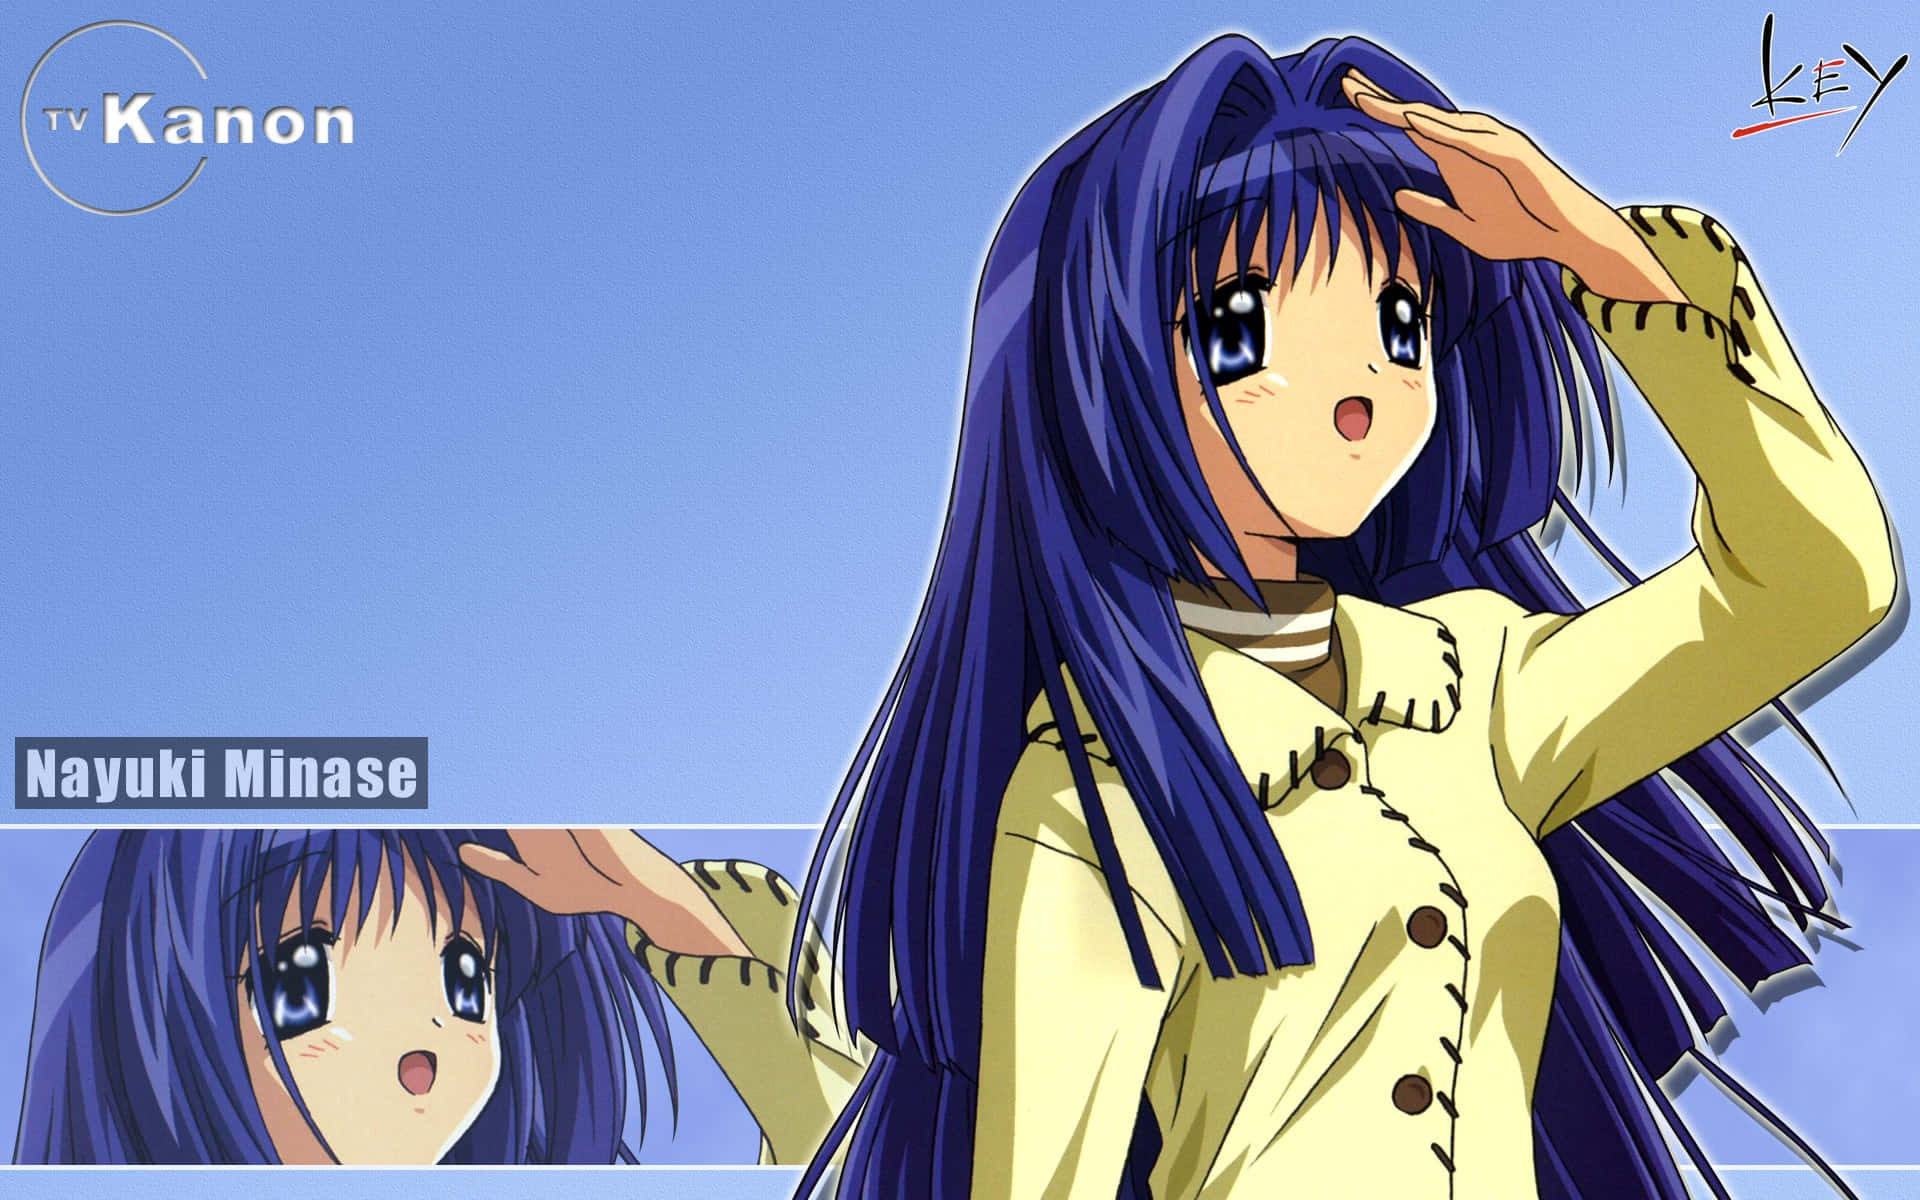 Nayuki Minase From Kanon In A Snowy Landscape Wallpaper